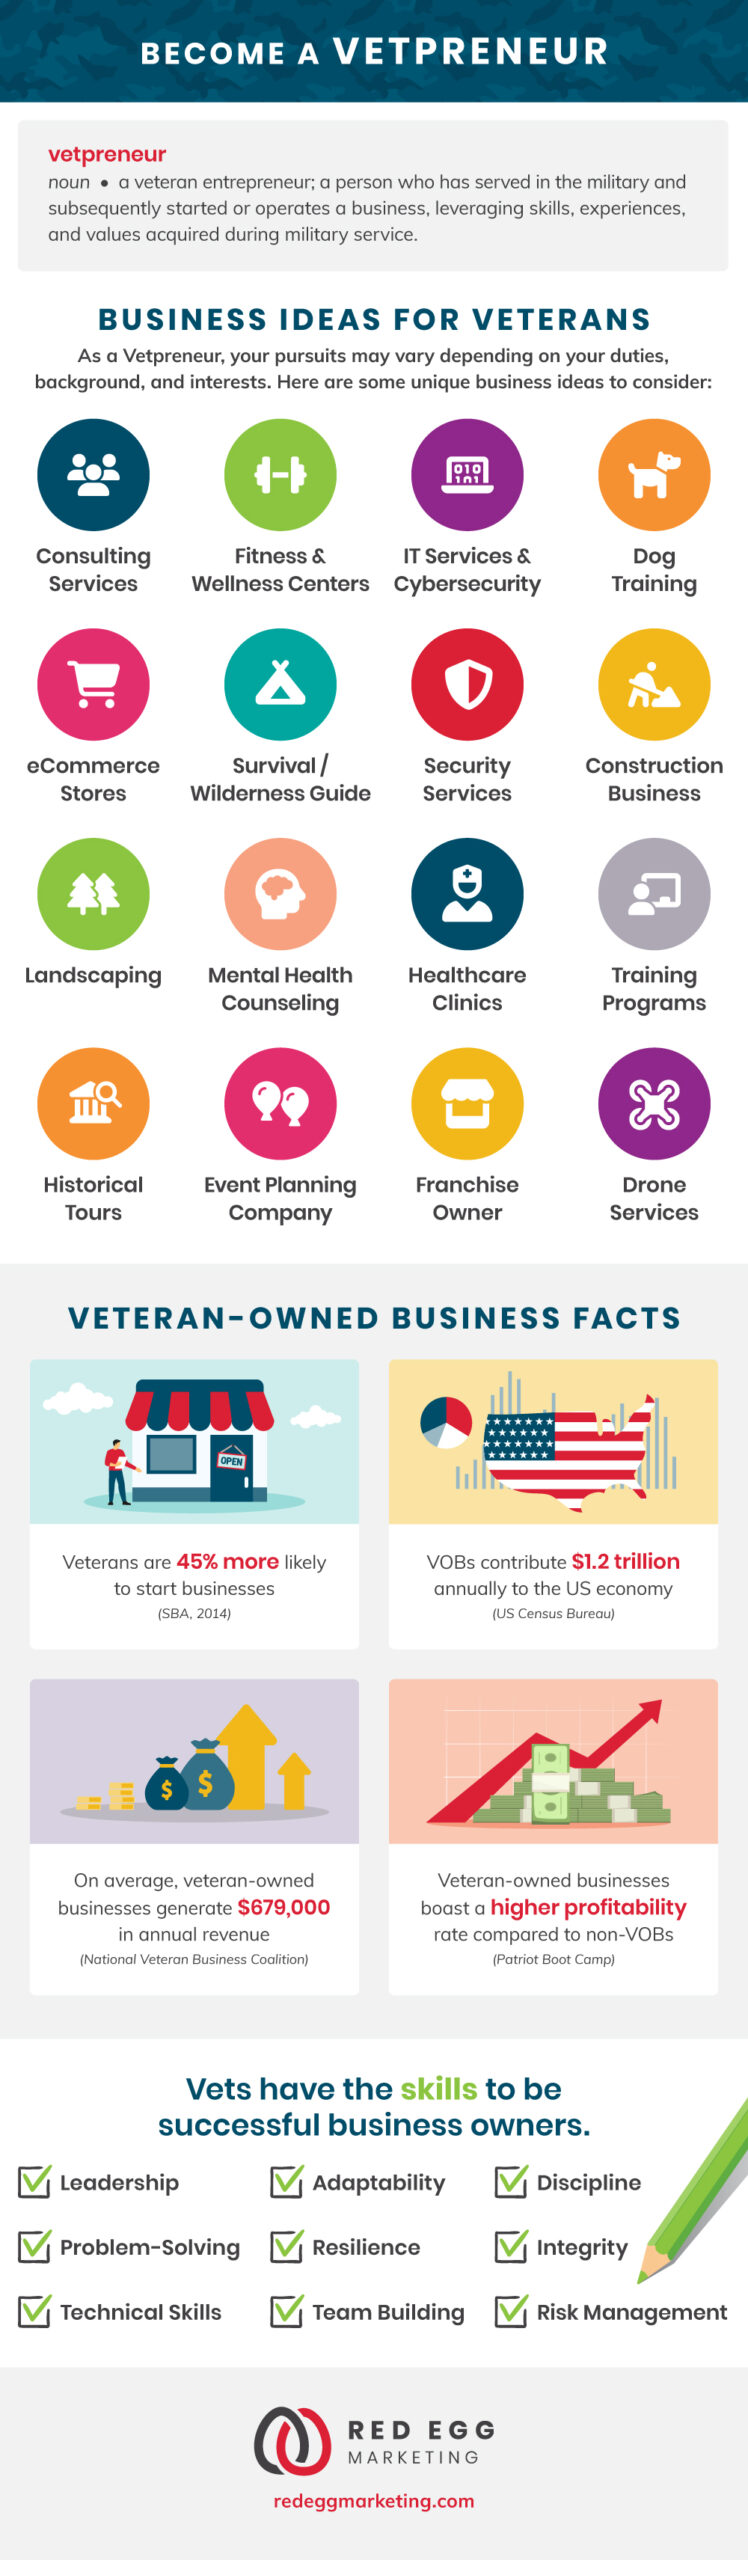 infographic on how to become a vetpreneur with business ideas for veterans listed in circle icons and veteran-owned business facts and skills that veterans possess